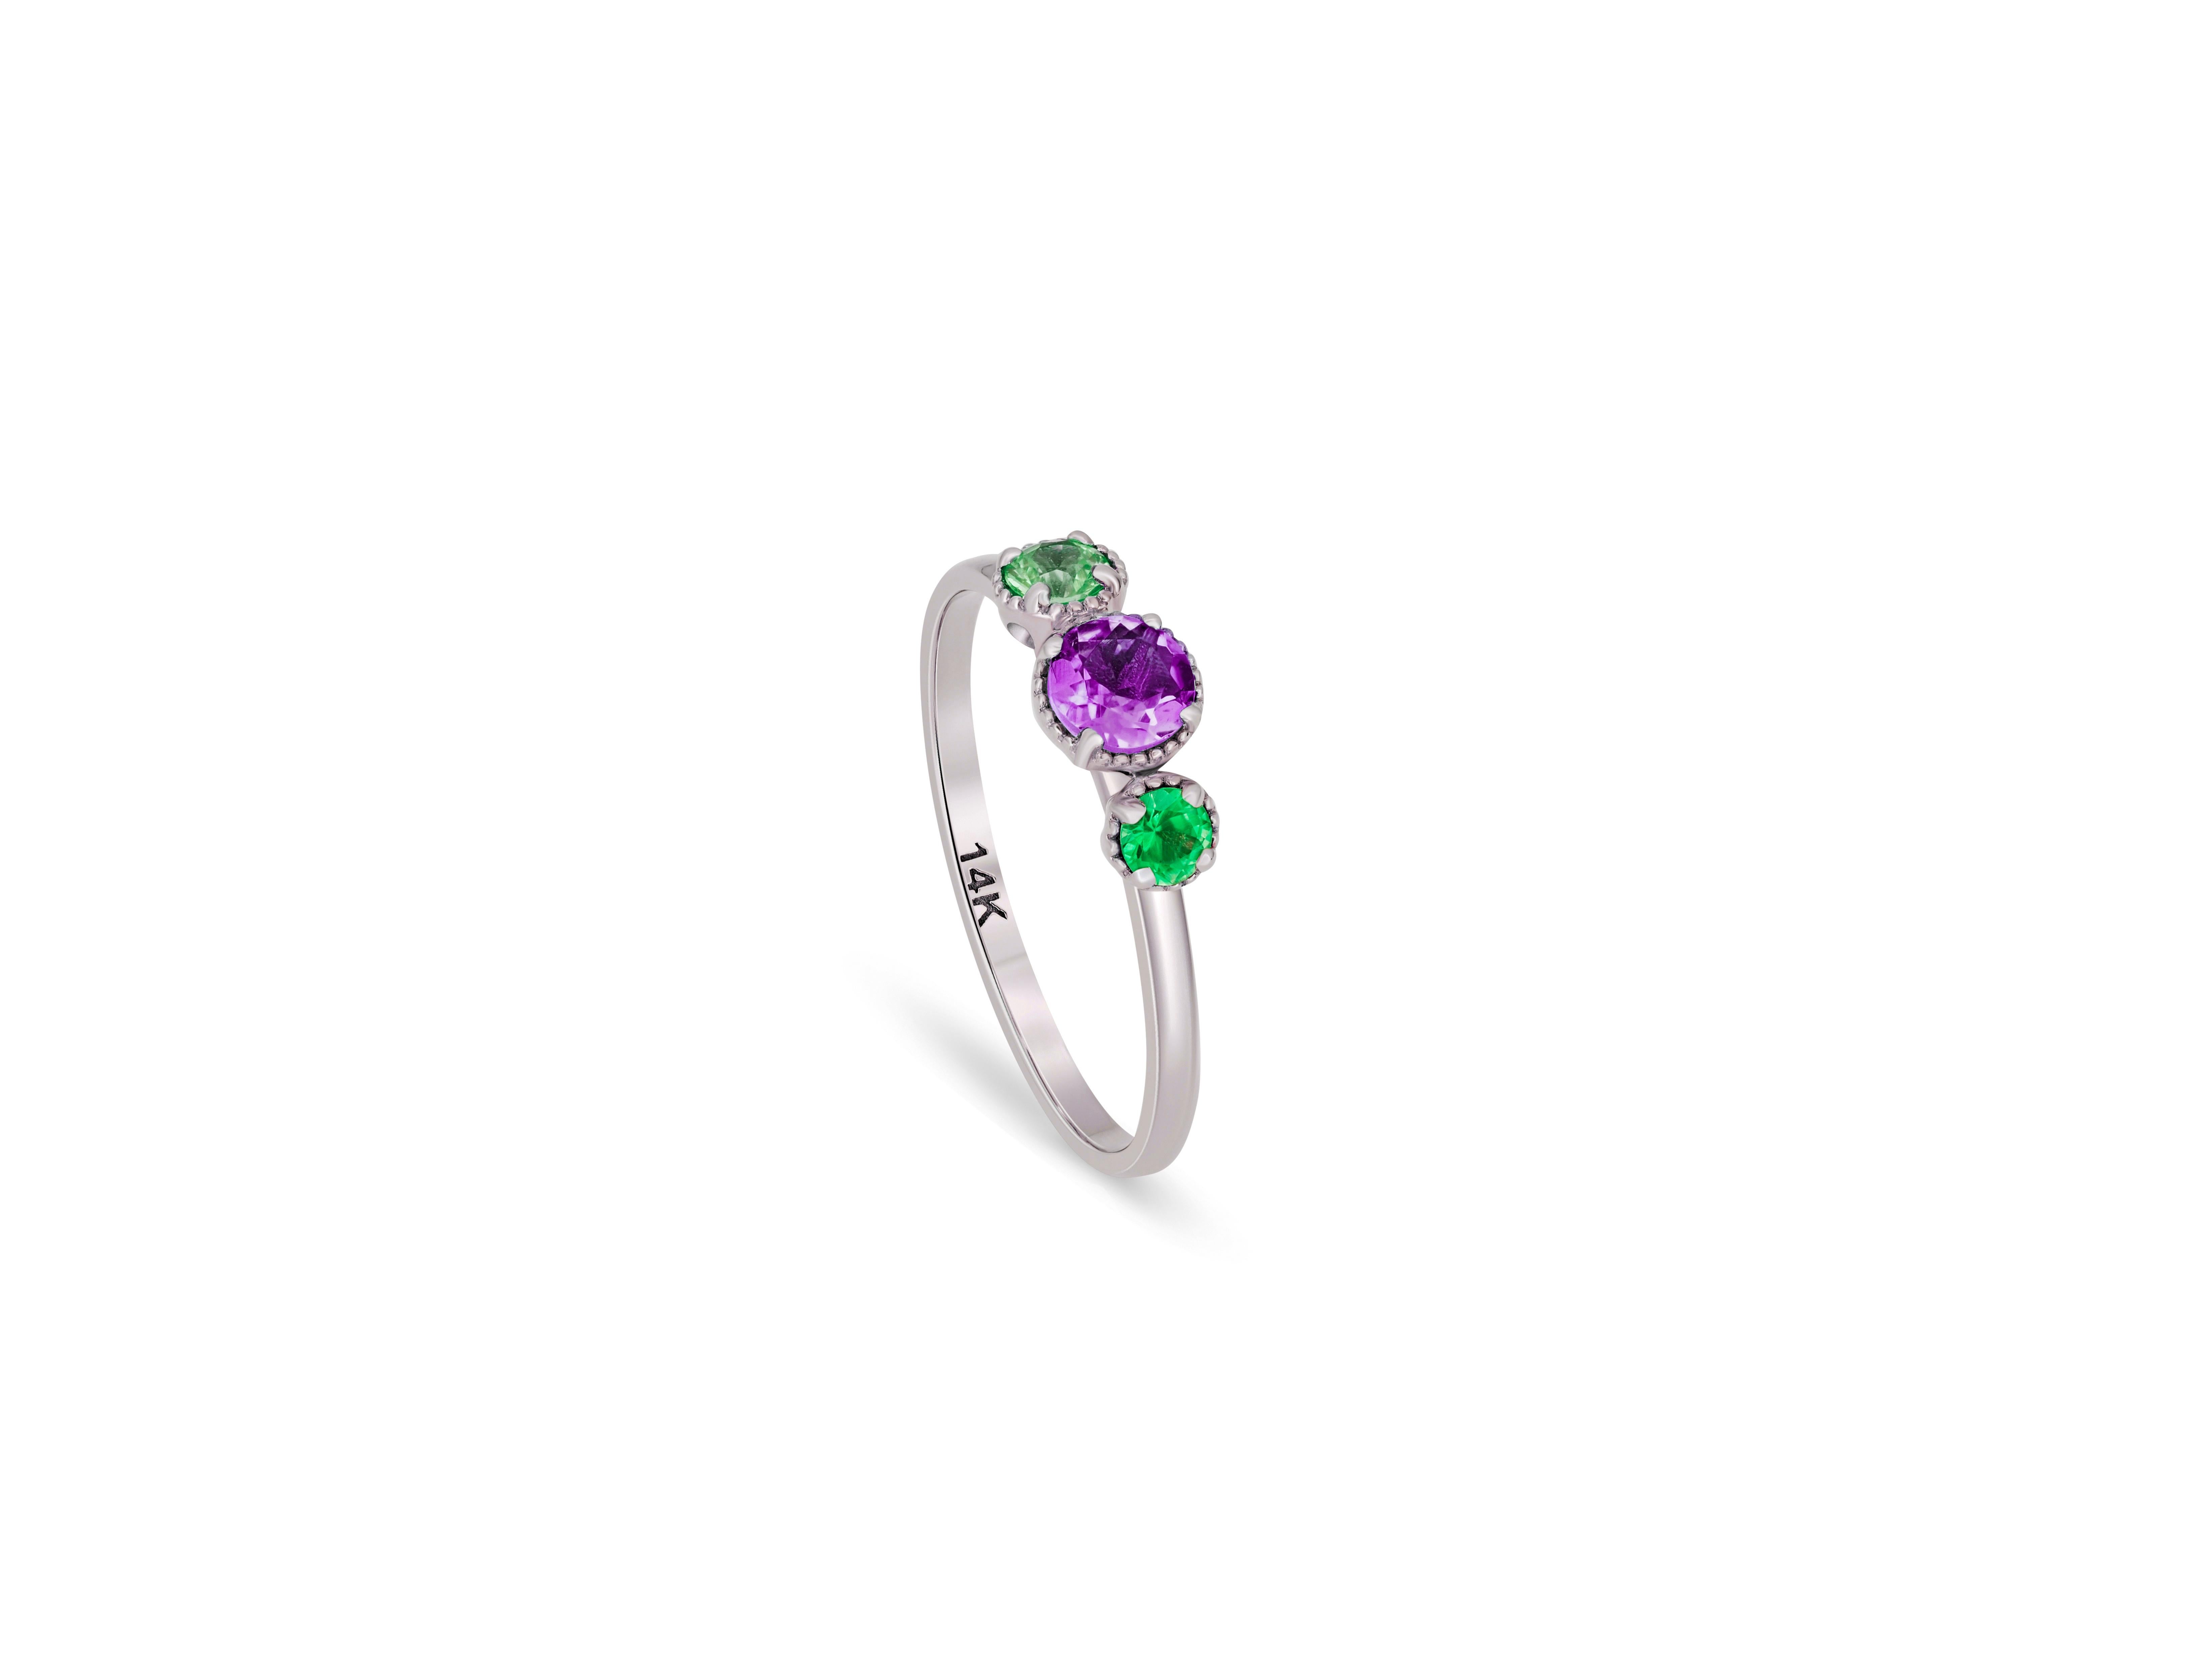 For Sale:  Green and purple gem 14k gold ring. 3